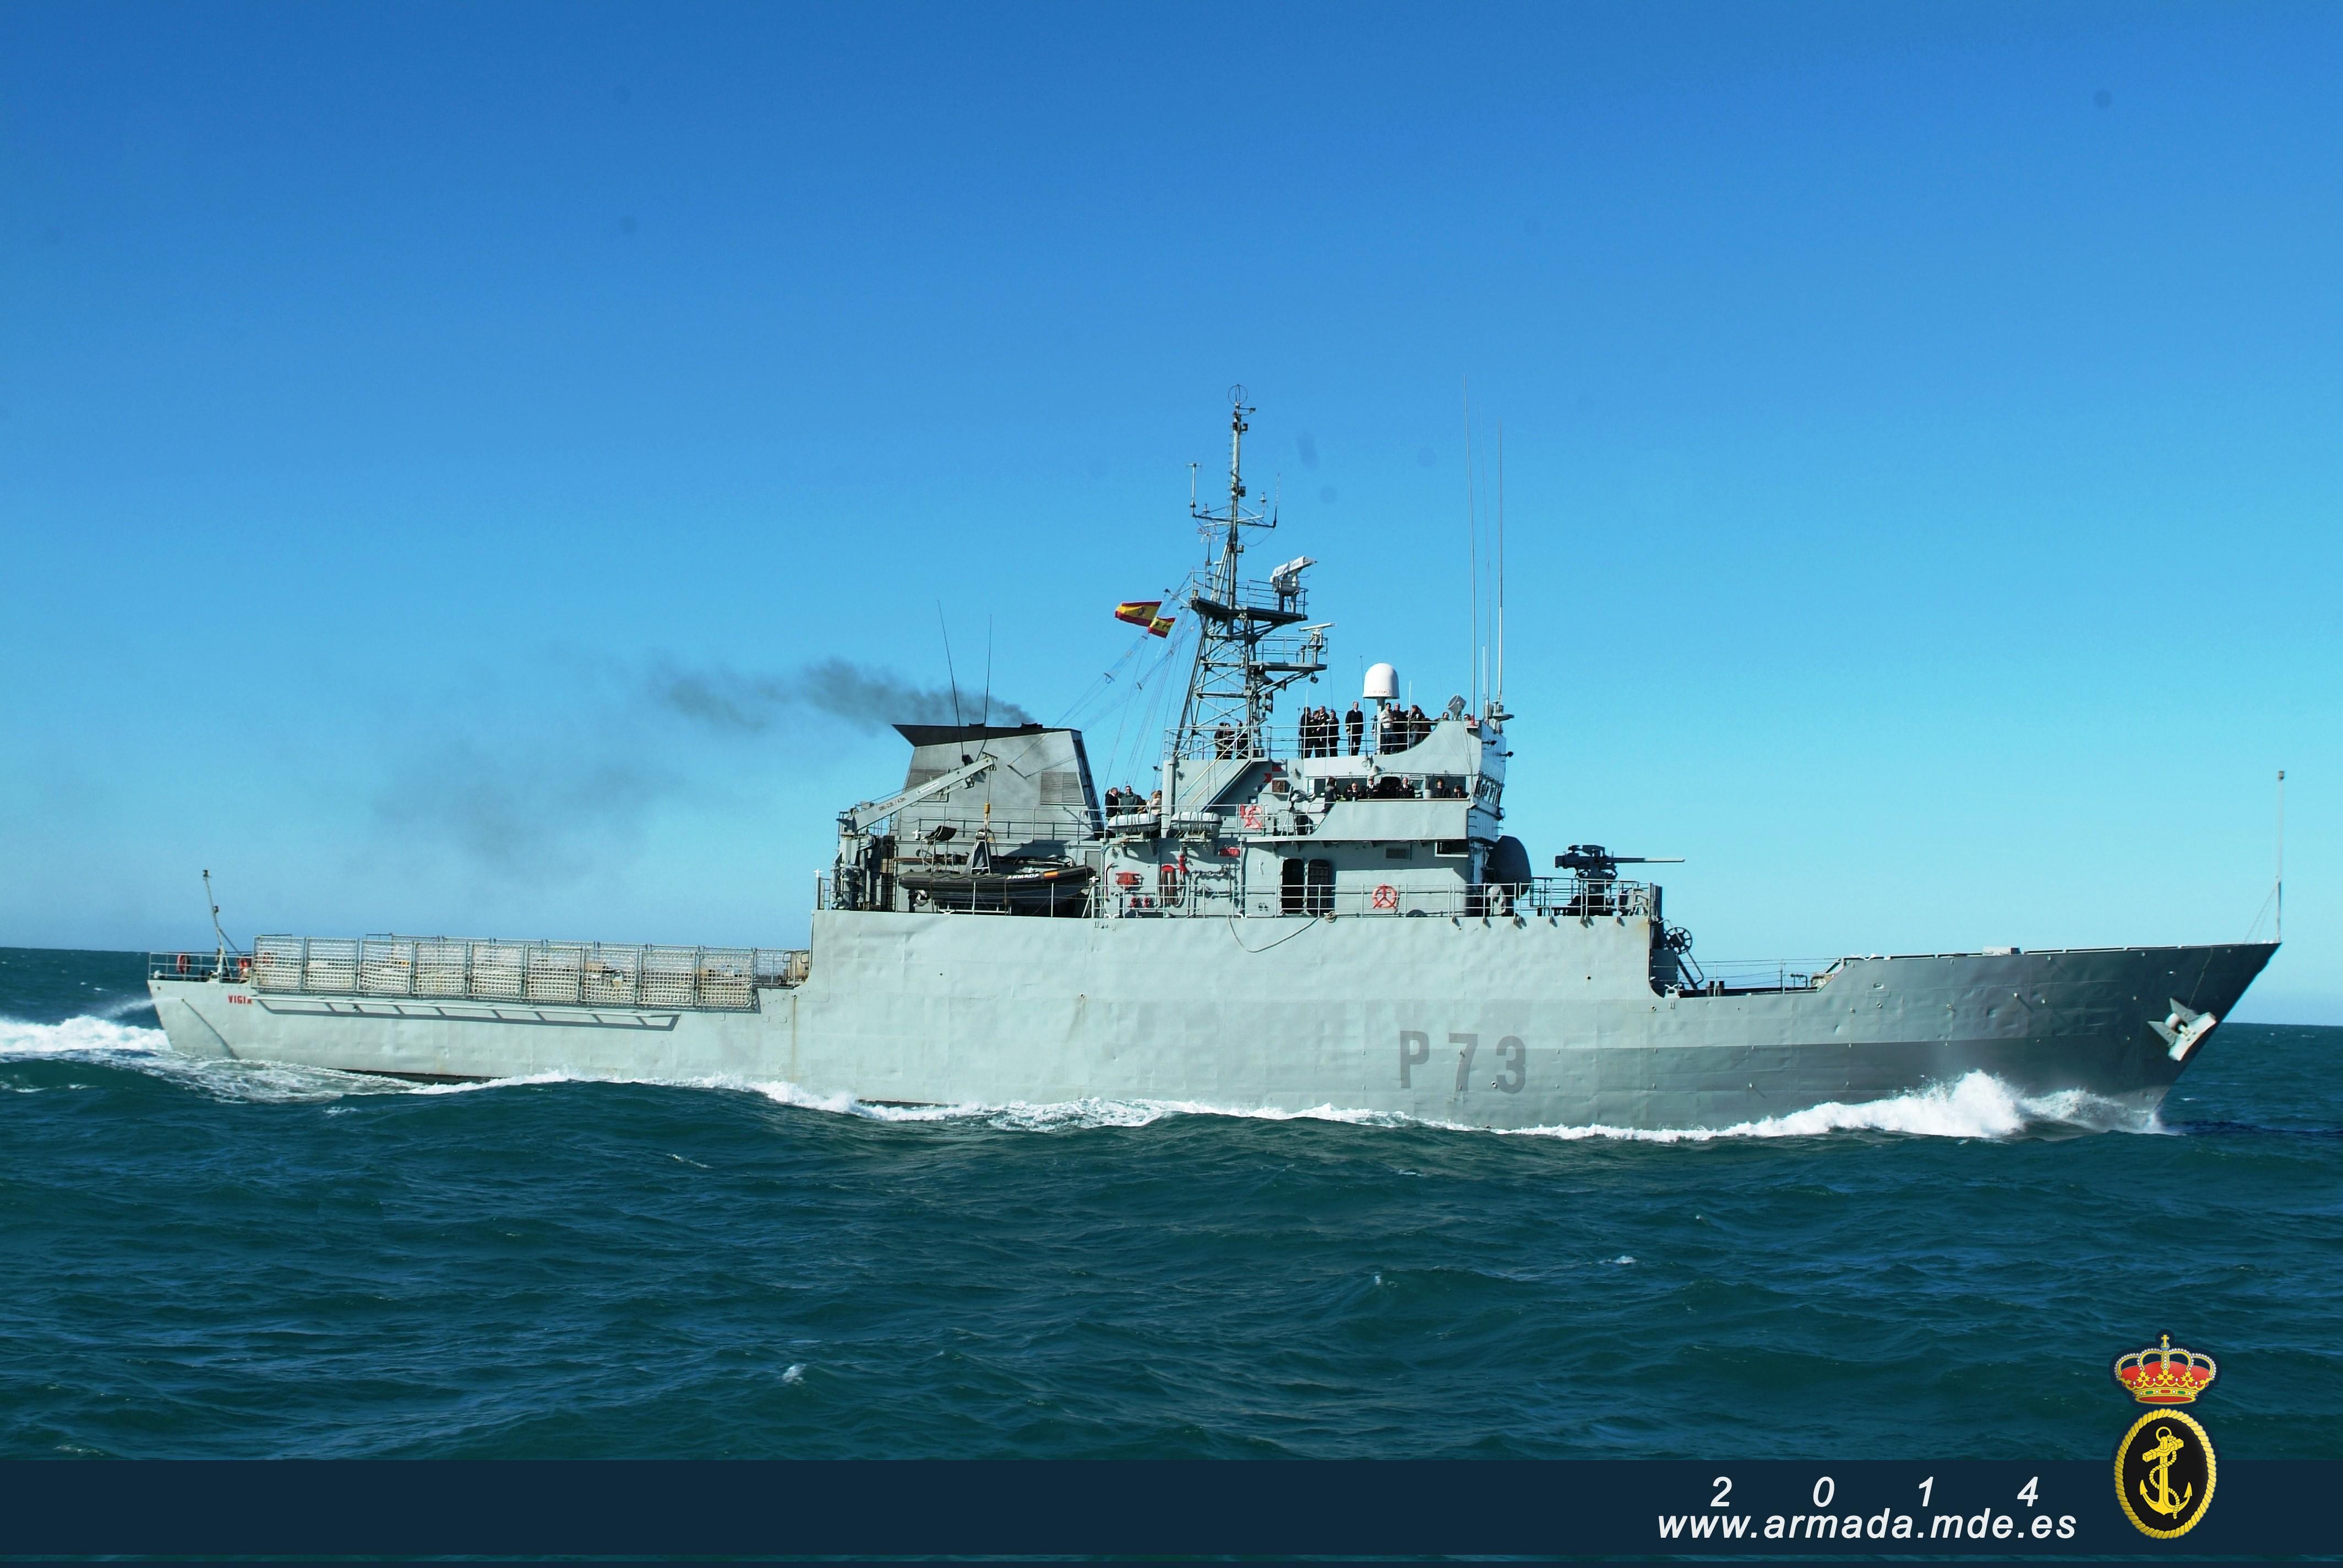 The patrol boat ‘Vigía’ is integrated into the Surveillance and Maritime Security Command